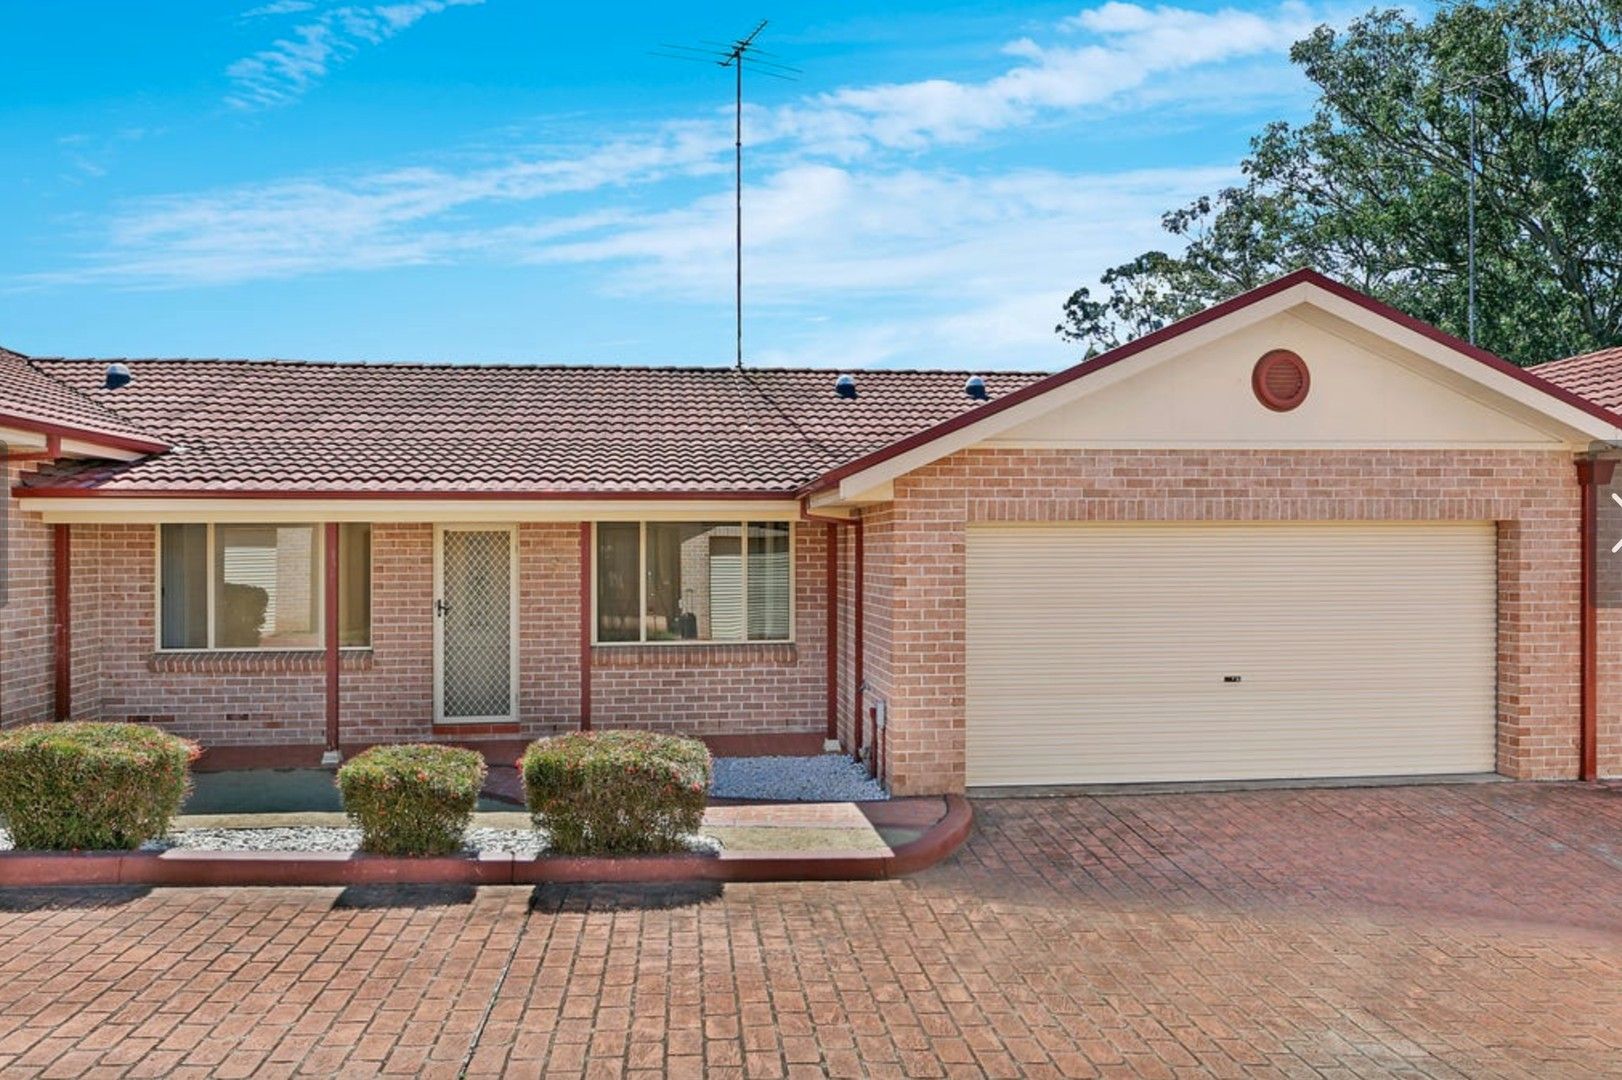 3 bedrooms House in 5/5-7 Pecks Road NORTH RICHMOND NSW, 2754